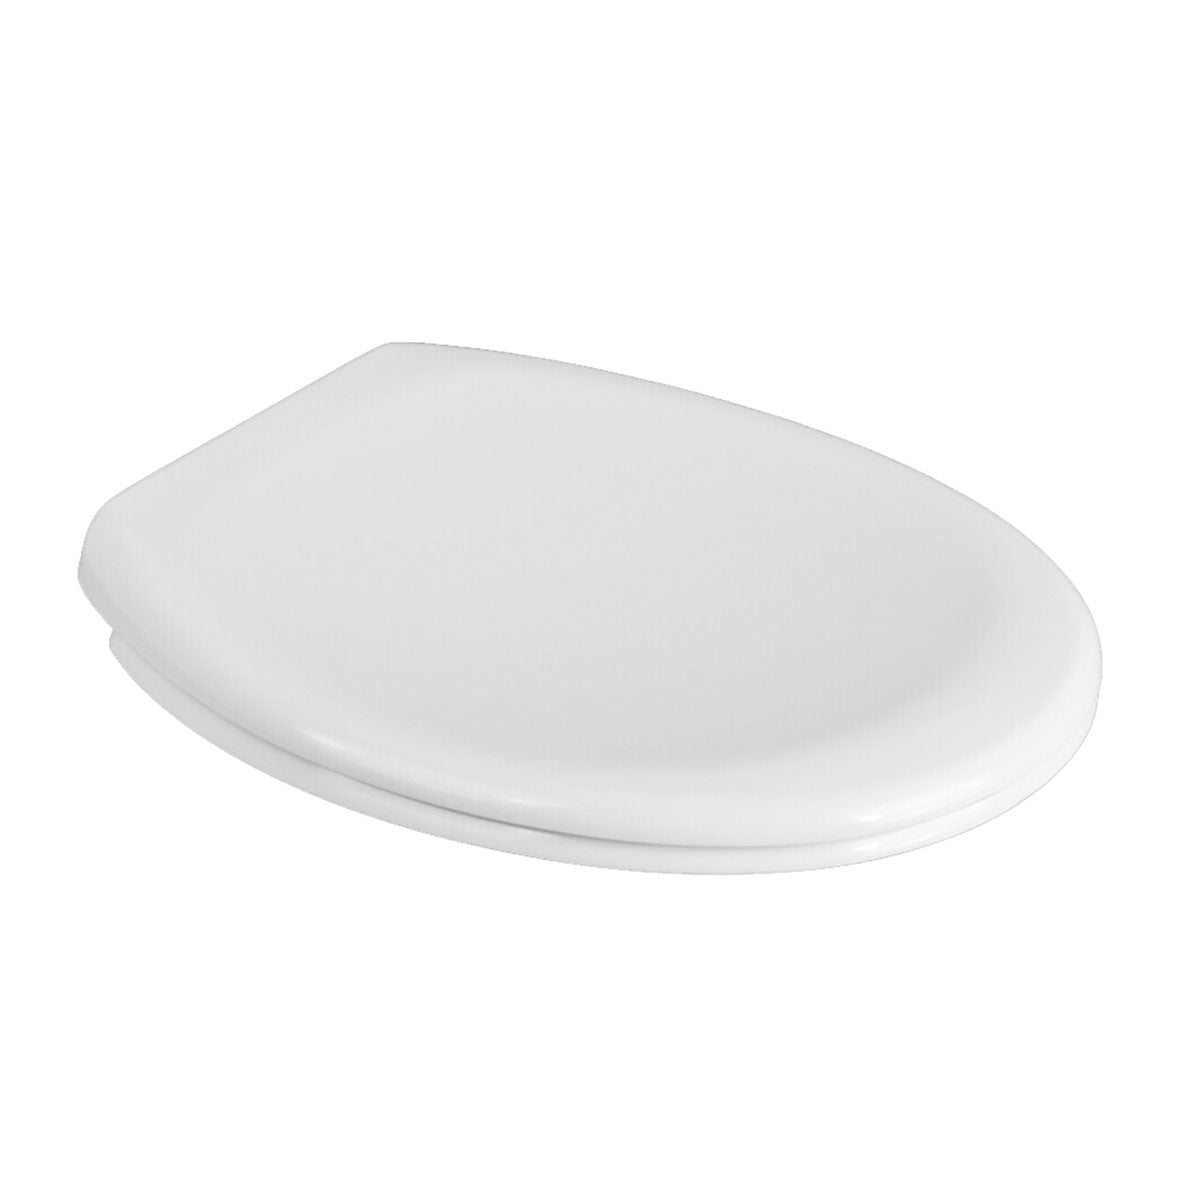 Standard Soft Close Toilet Seat With Quick Release Hinges - White